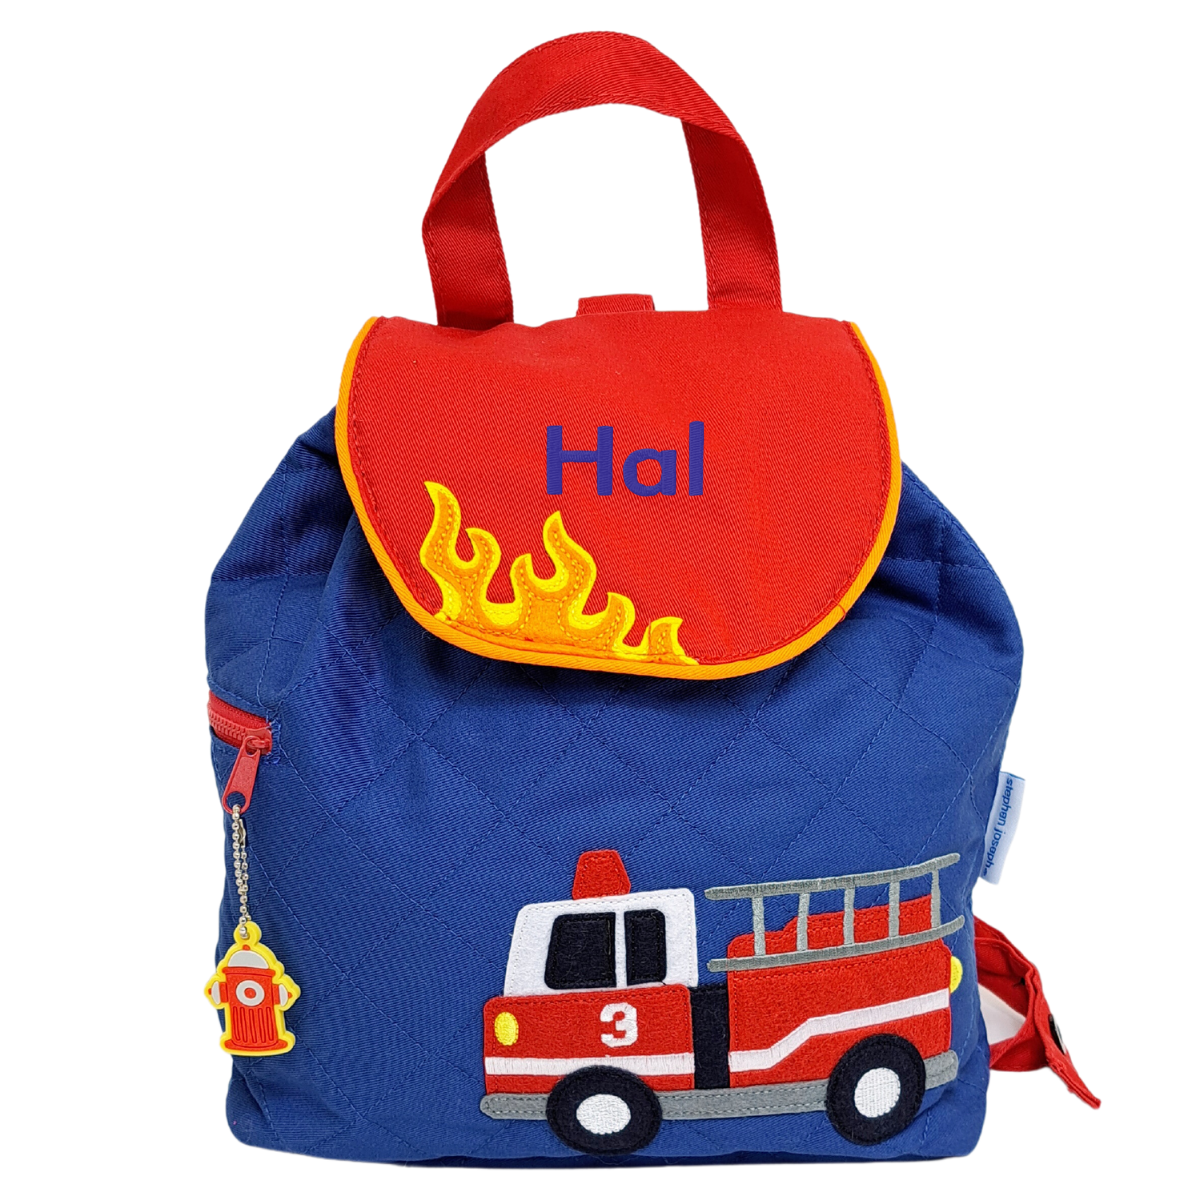 Image of a Stephen Joseph quilted back pack. The main body of the bag is blue with an appliqued fire engine on the front. The flap of the bag is red with orange piping with some yellow and orange flames appliqued along the edge of the flap.